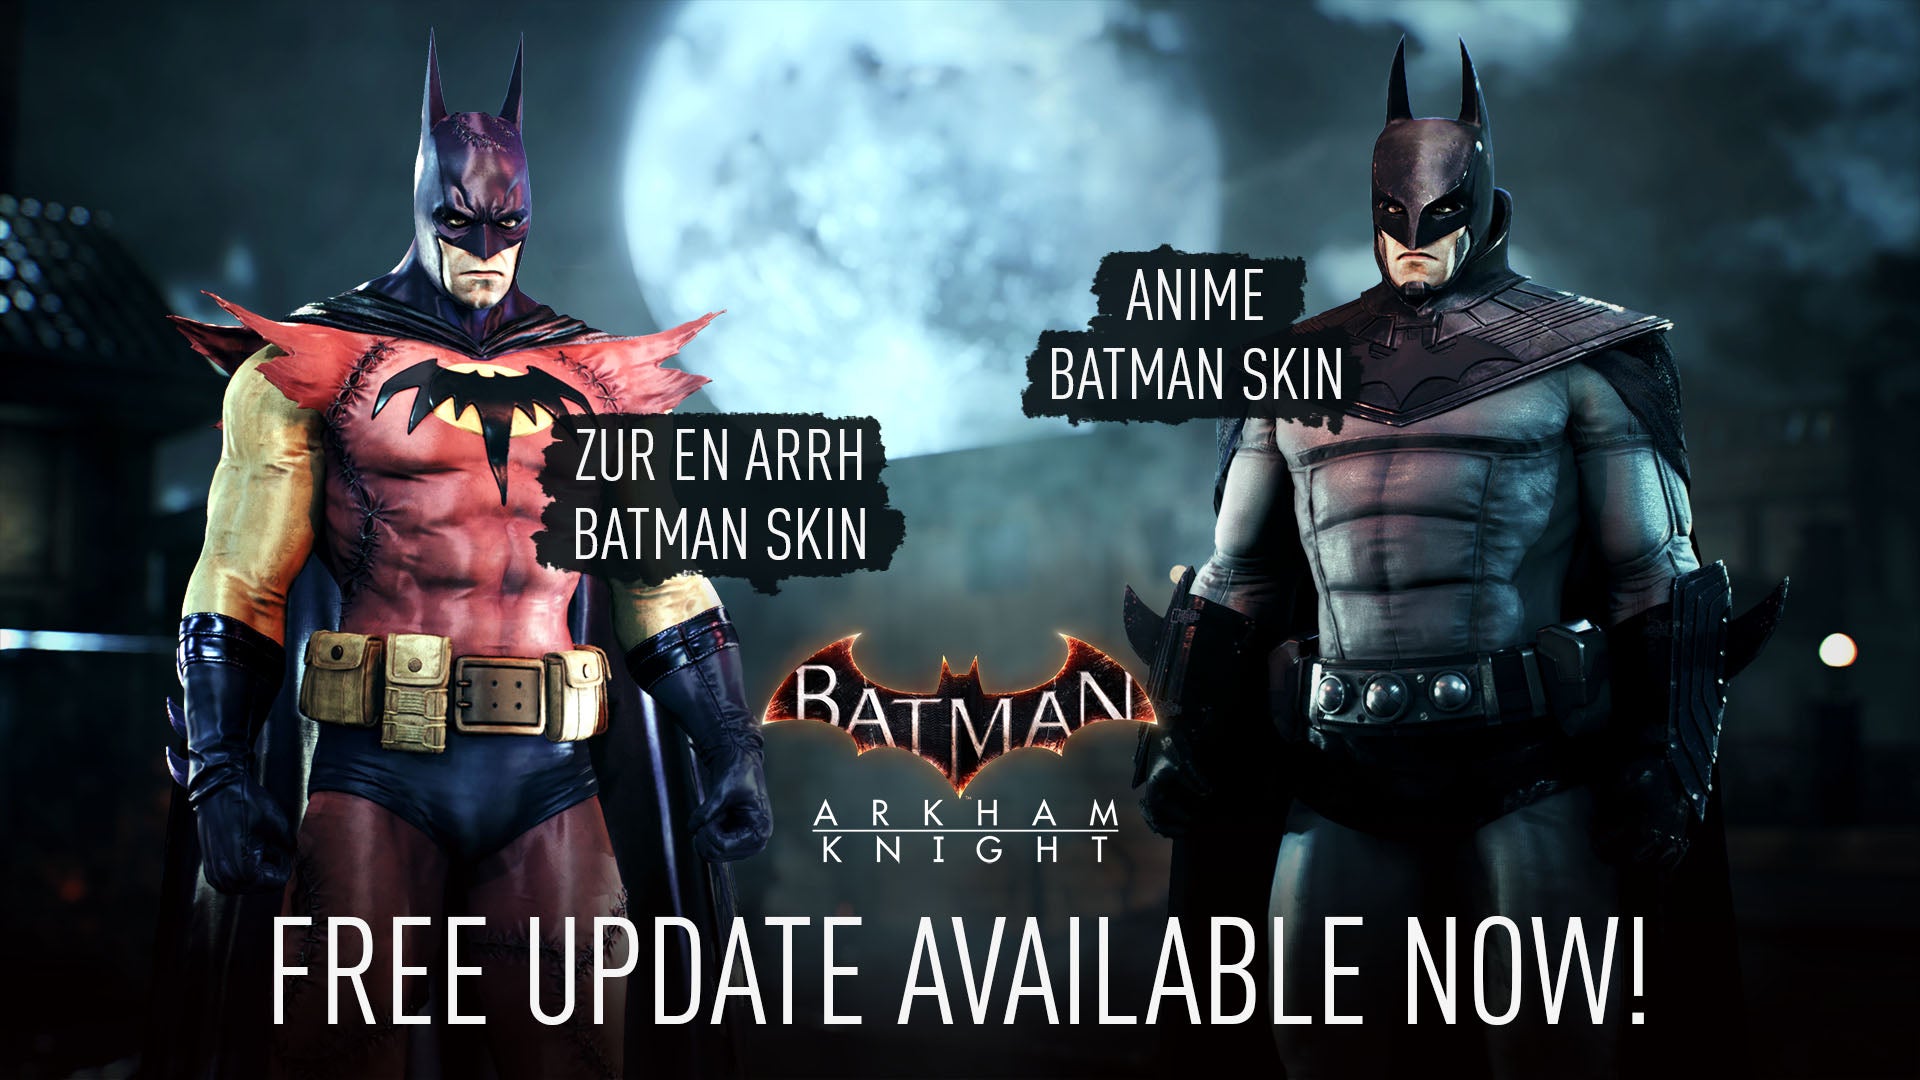 Image for Batman: Arkham Knight updated with two new skins